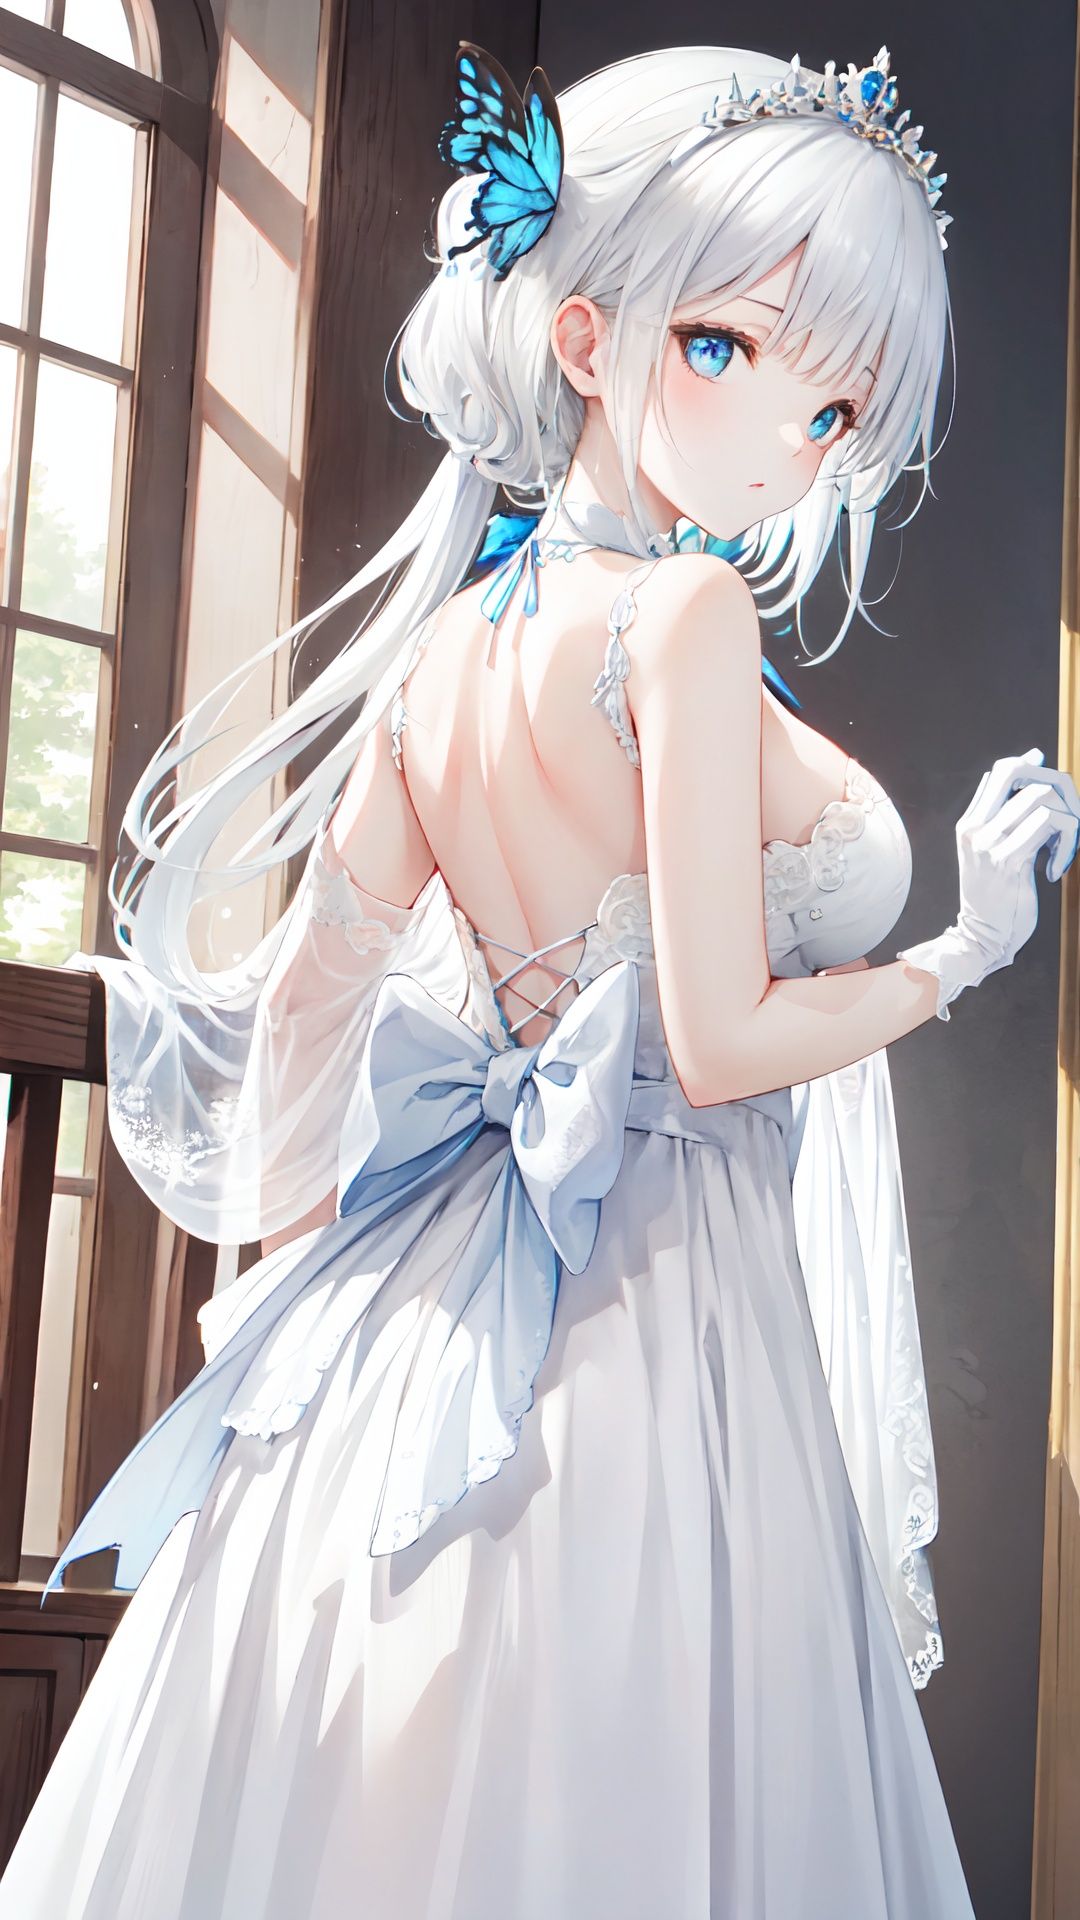 finely detail, Depth of field, (((masterpiece))), ((extremely detailed CG unity 8k wallpaper)), best quality, high resolution illustration, Amazing, intricate detail, (best illumination, best shadow, an extremely delicate and beautiful),

1girl, long_hair, white hair, (hair accessories), cleavage, Brooch, Exquisite ornaments, clear, crystal chains decorate, Iris proantha, (white evening dress:1.4), bird, collarbone, butterfly, blue_eyes

girdling, bow tie, ribbon, shawl, Long gloves and short gloves, The bird stands on the back of its hand